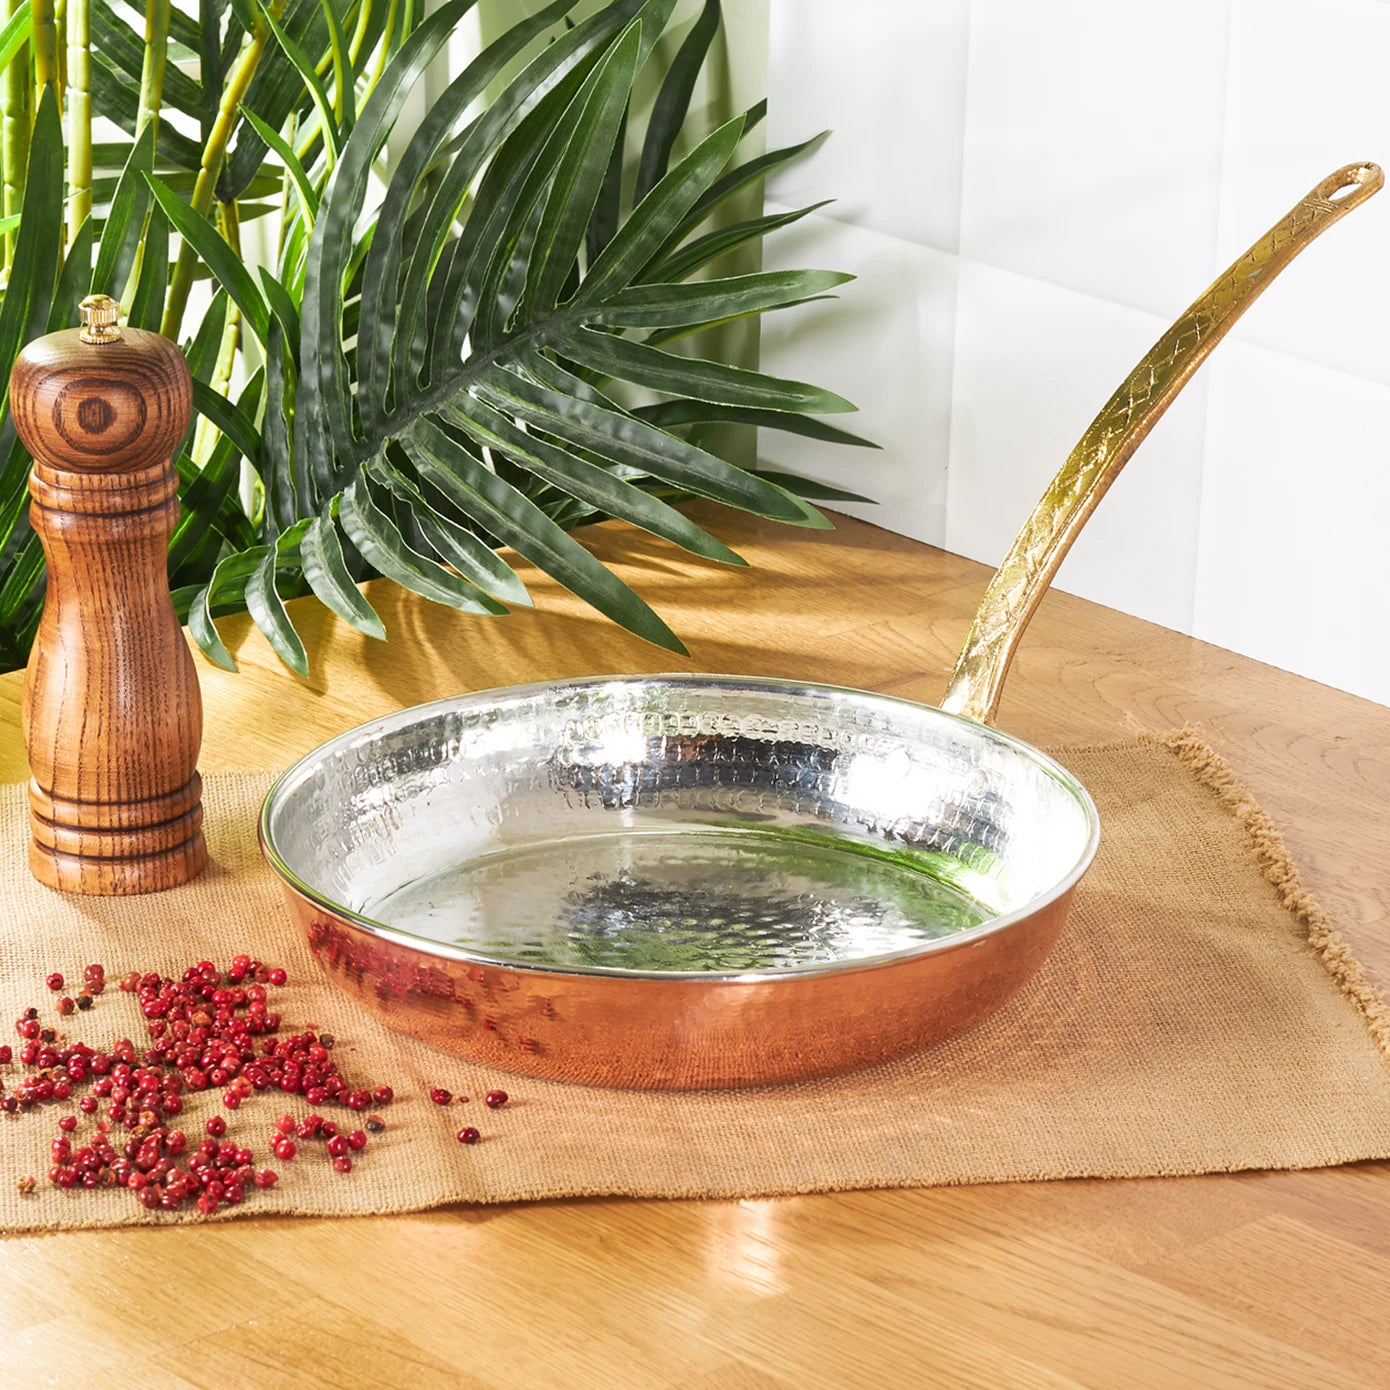 Exquisite handmade frying copper pan for exceptional cooking experience